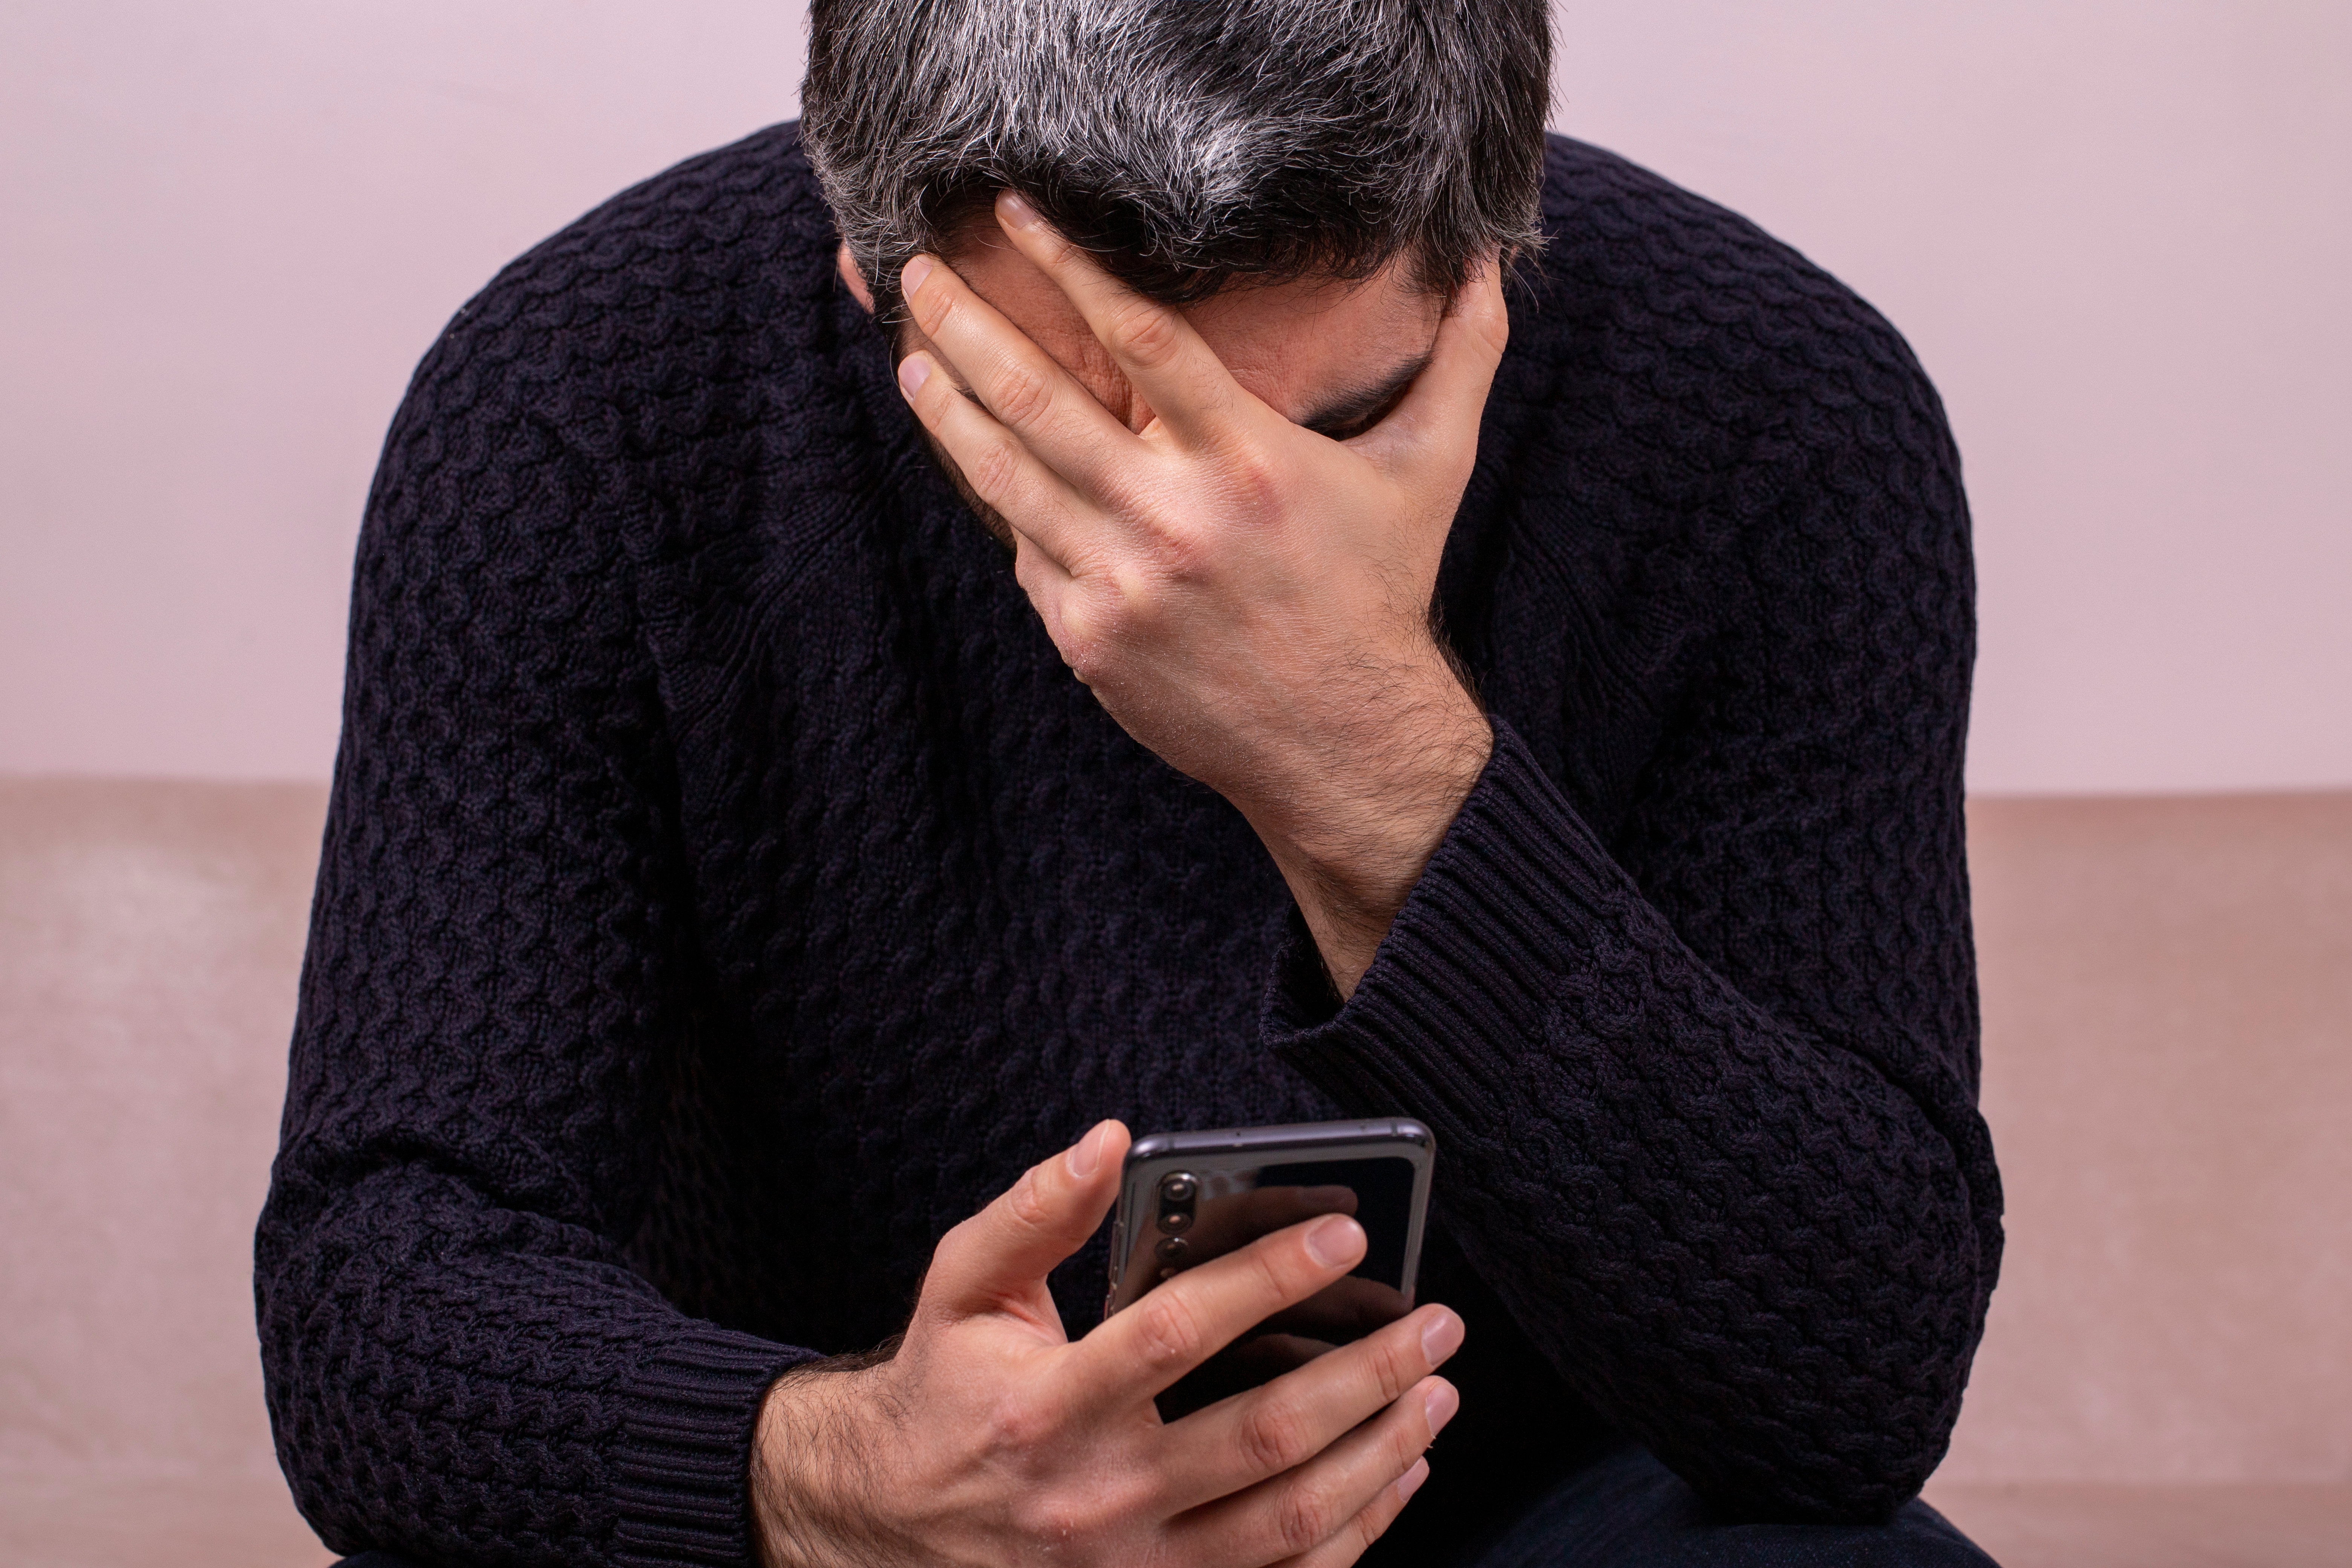 Sad middle-aged man with the phone in hand. | Source: Shutterstock